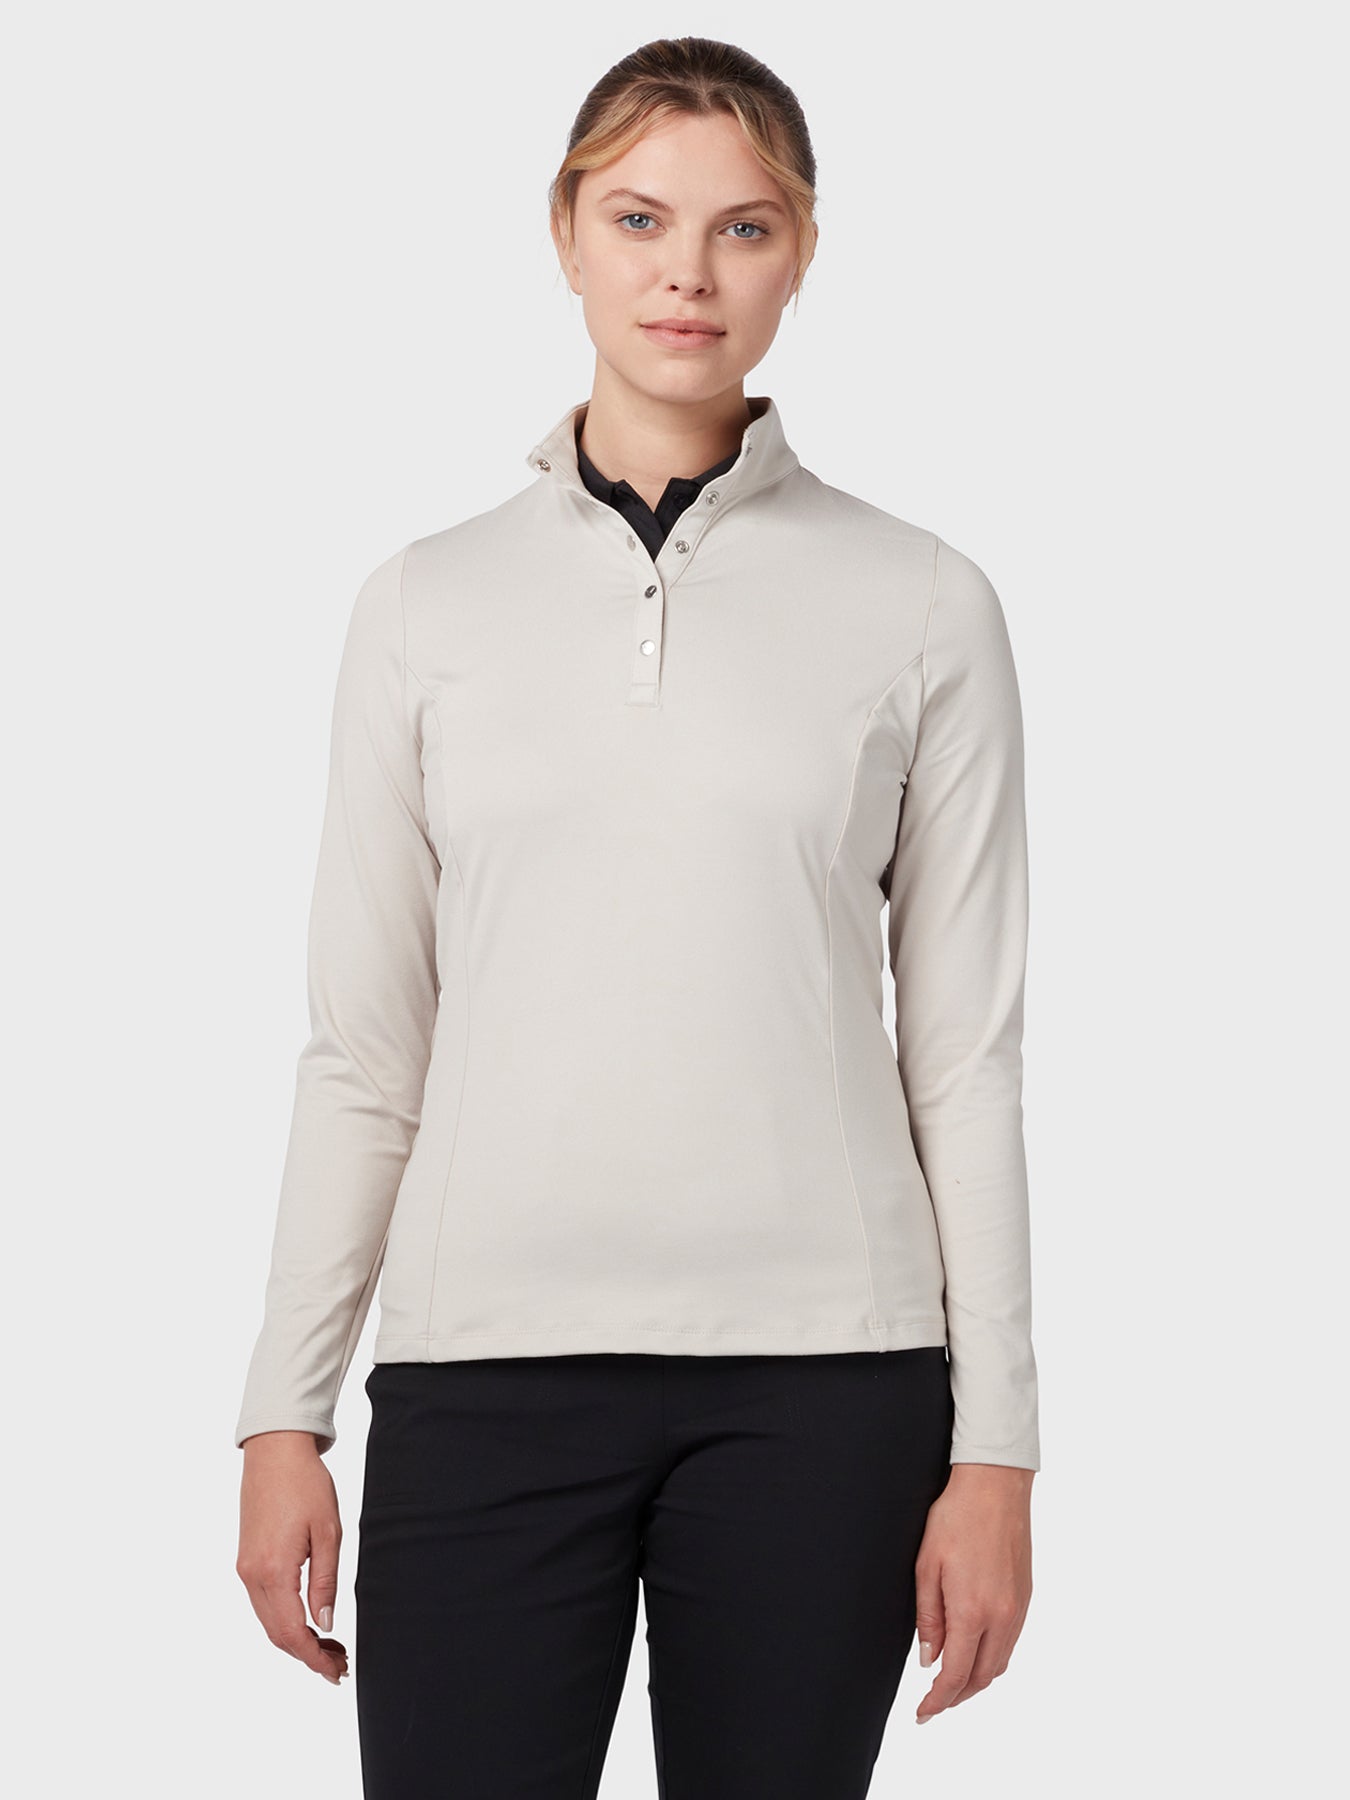 View Womens Thermal Longsleeve Fleece Back Jersey Polo In Chateau Grey Chateau Grey XS information